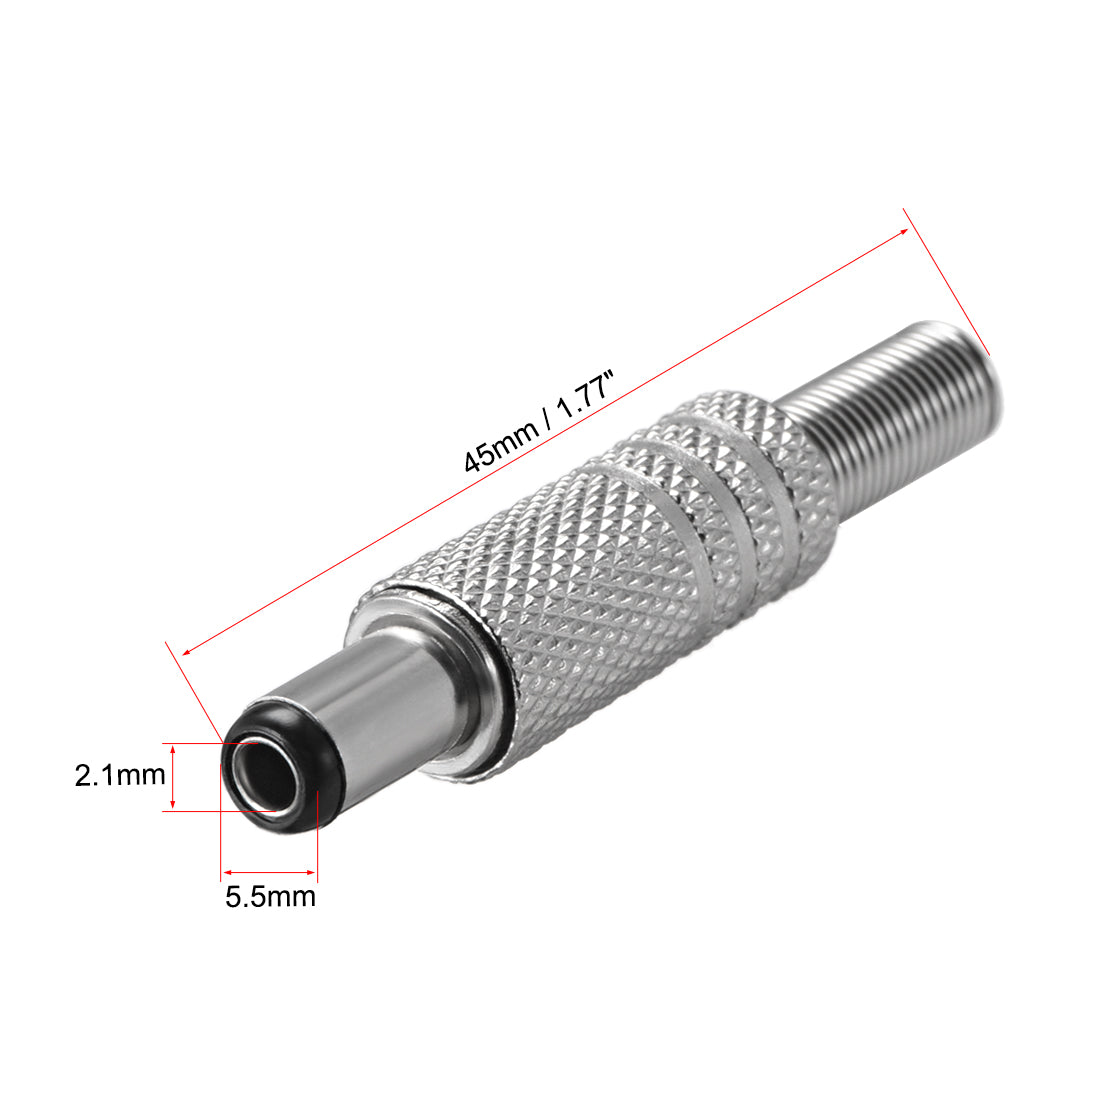 Uxcell Uxcell DC Male Connector 5.5mm x 2.1mm x 9mm Power Cable Jack Adapter Coupler Silver Tone 5Pcs